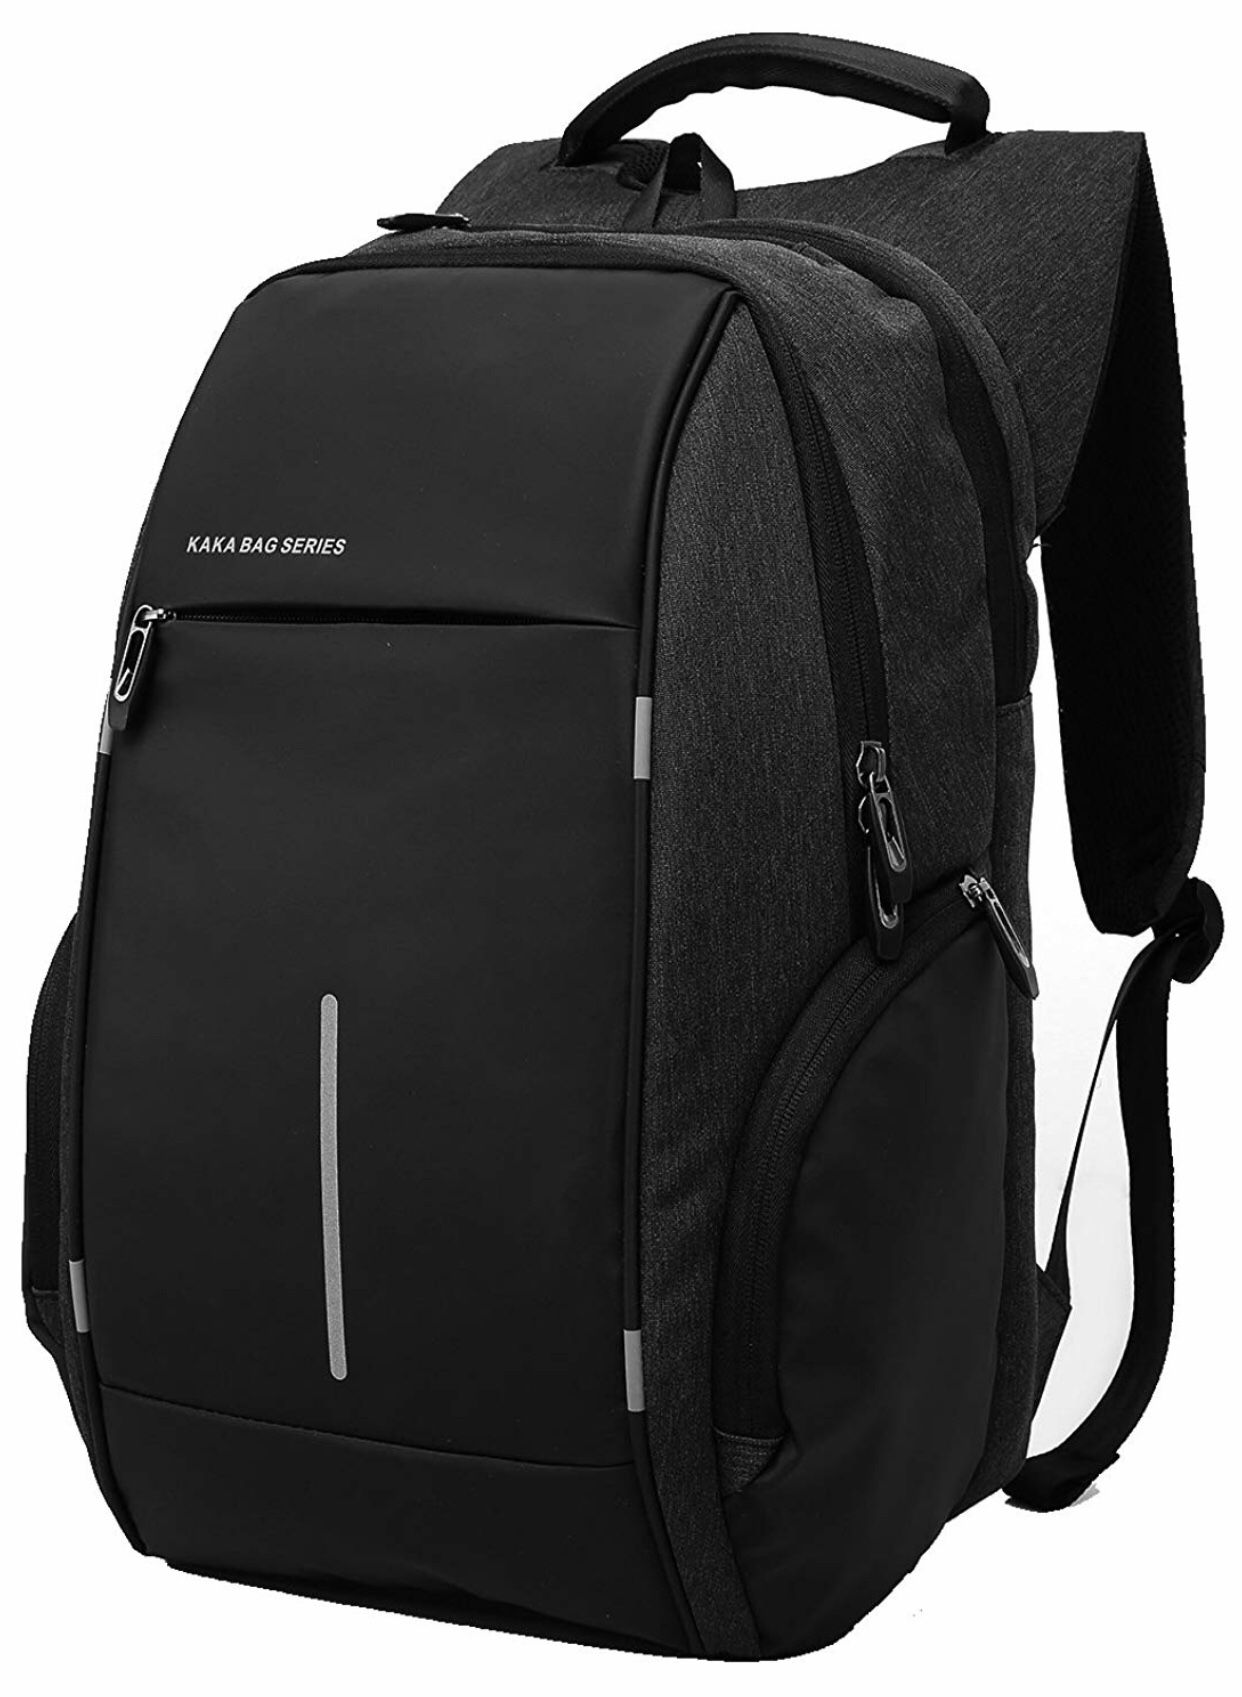 Oxford Laptop Backpack Business Anti Theft Slim Rucksack Water Resistant Durable Large Capacity Daypack with Reflective Strip